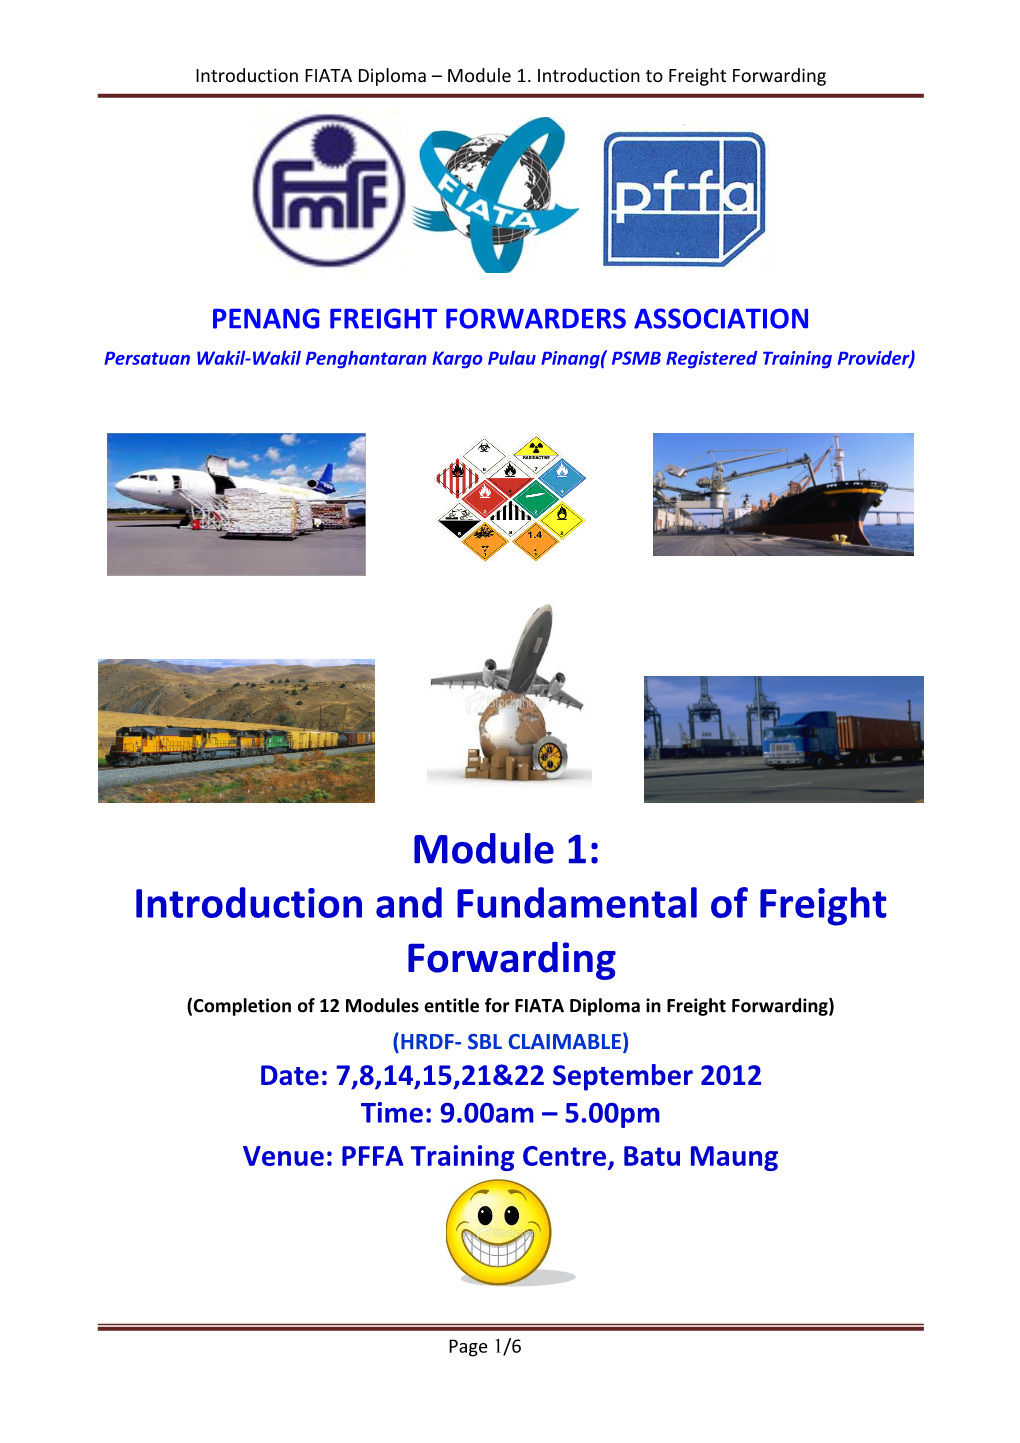 Introduction FIATA Diploma Module 1. Introduction to Freight Forwarding